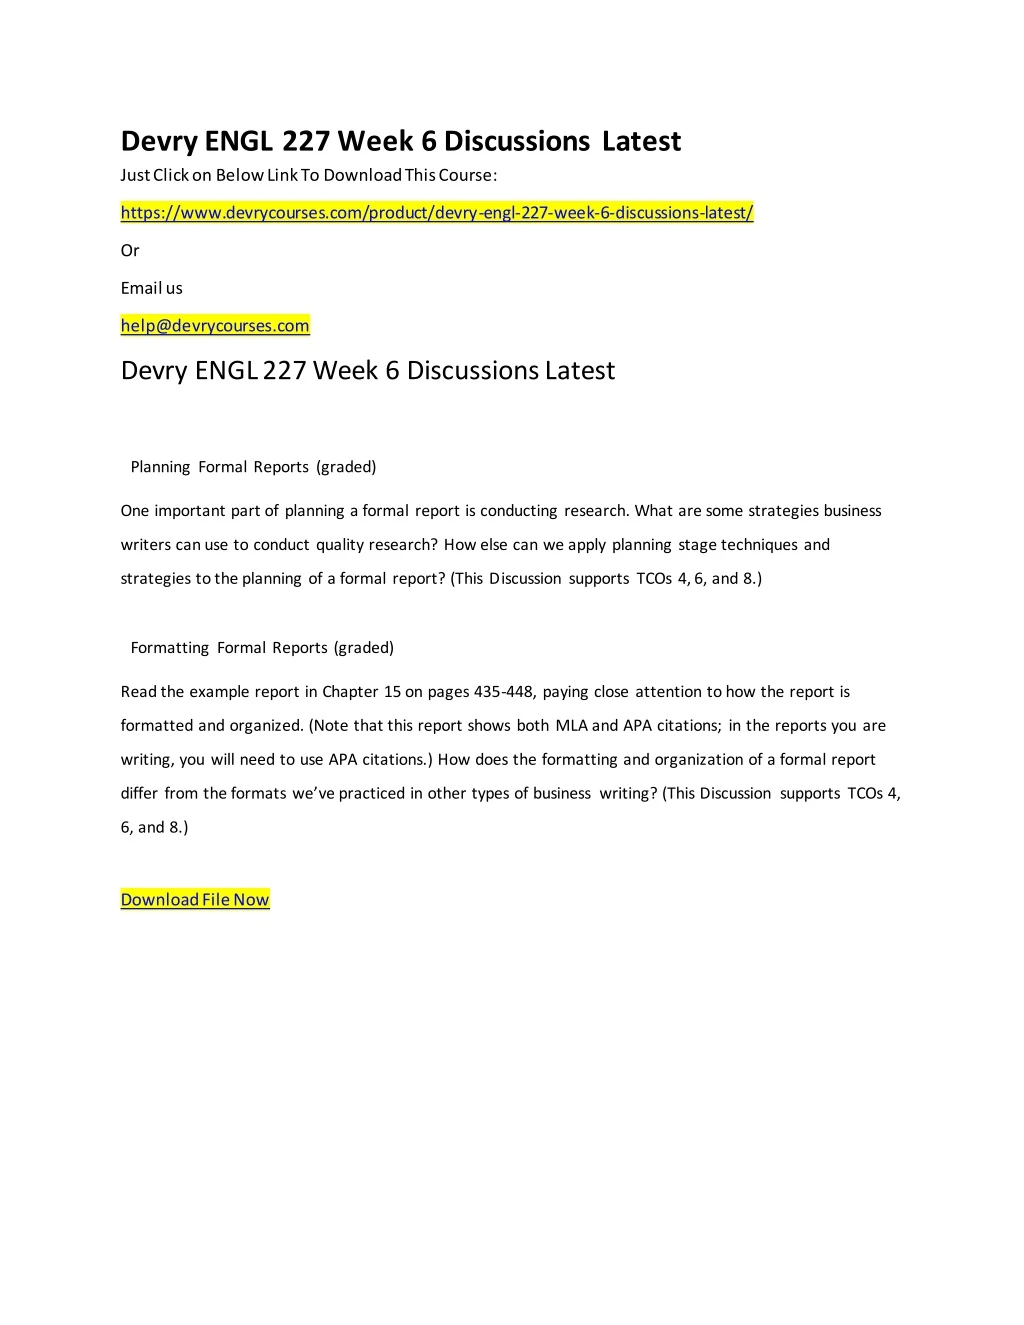 devry engl 227 week 6 discussions latest just